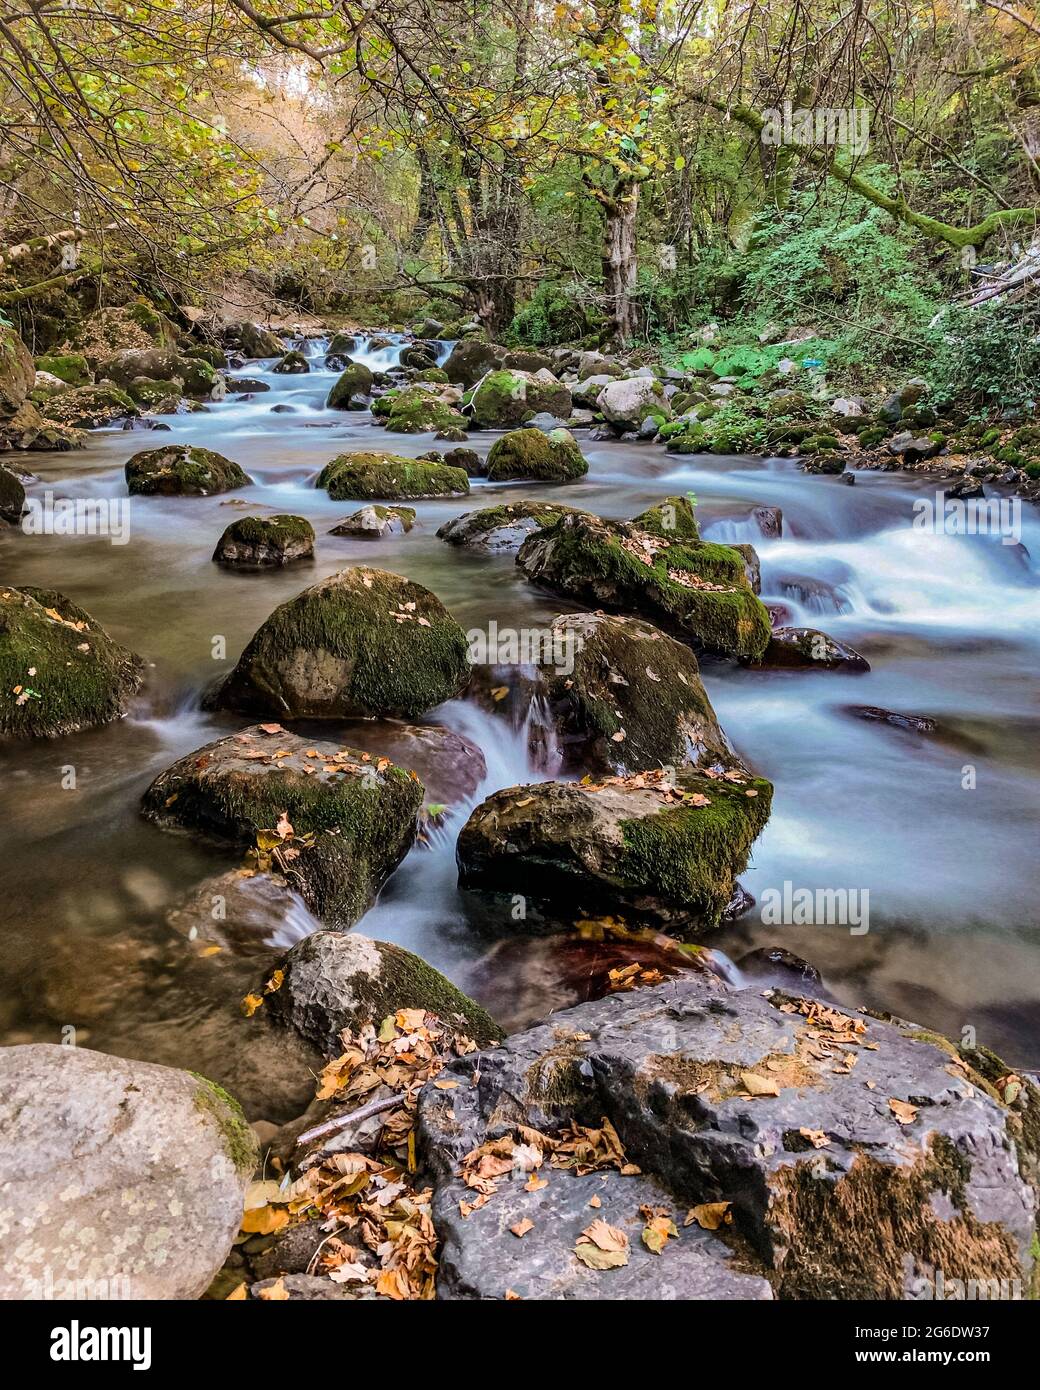 Long exposure smooth flowing water over rocks in forest Stock Photo